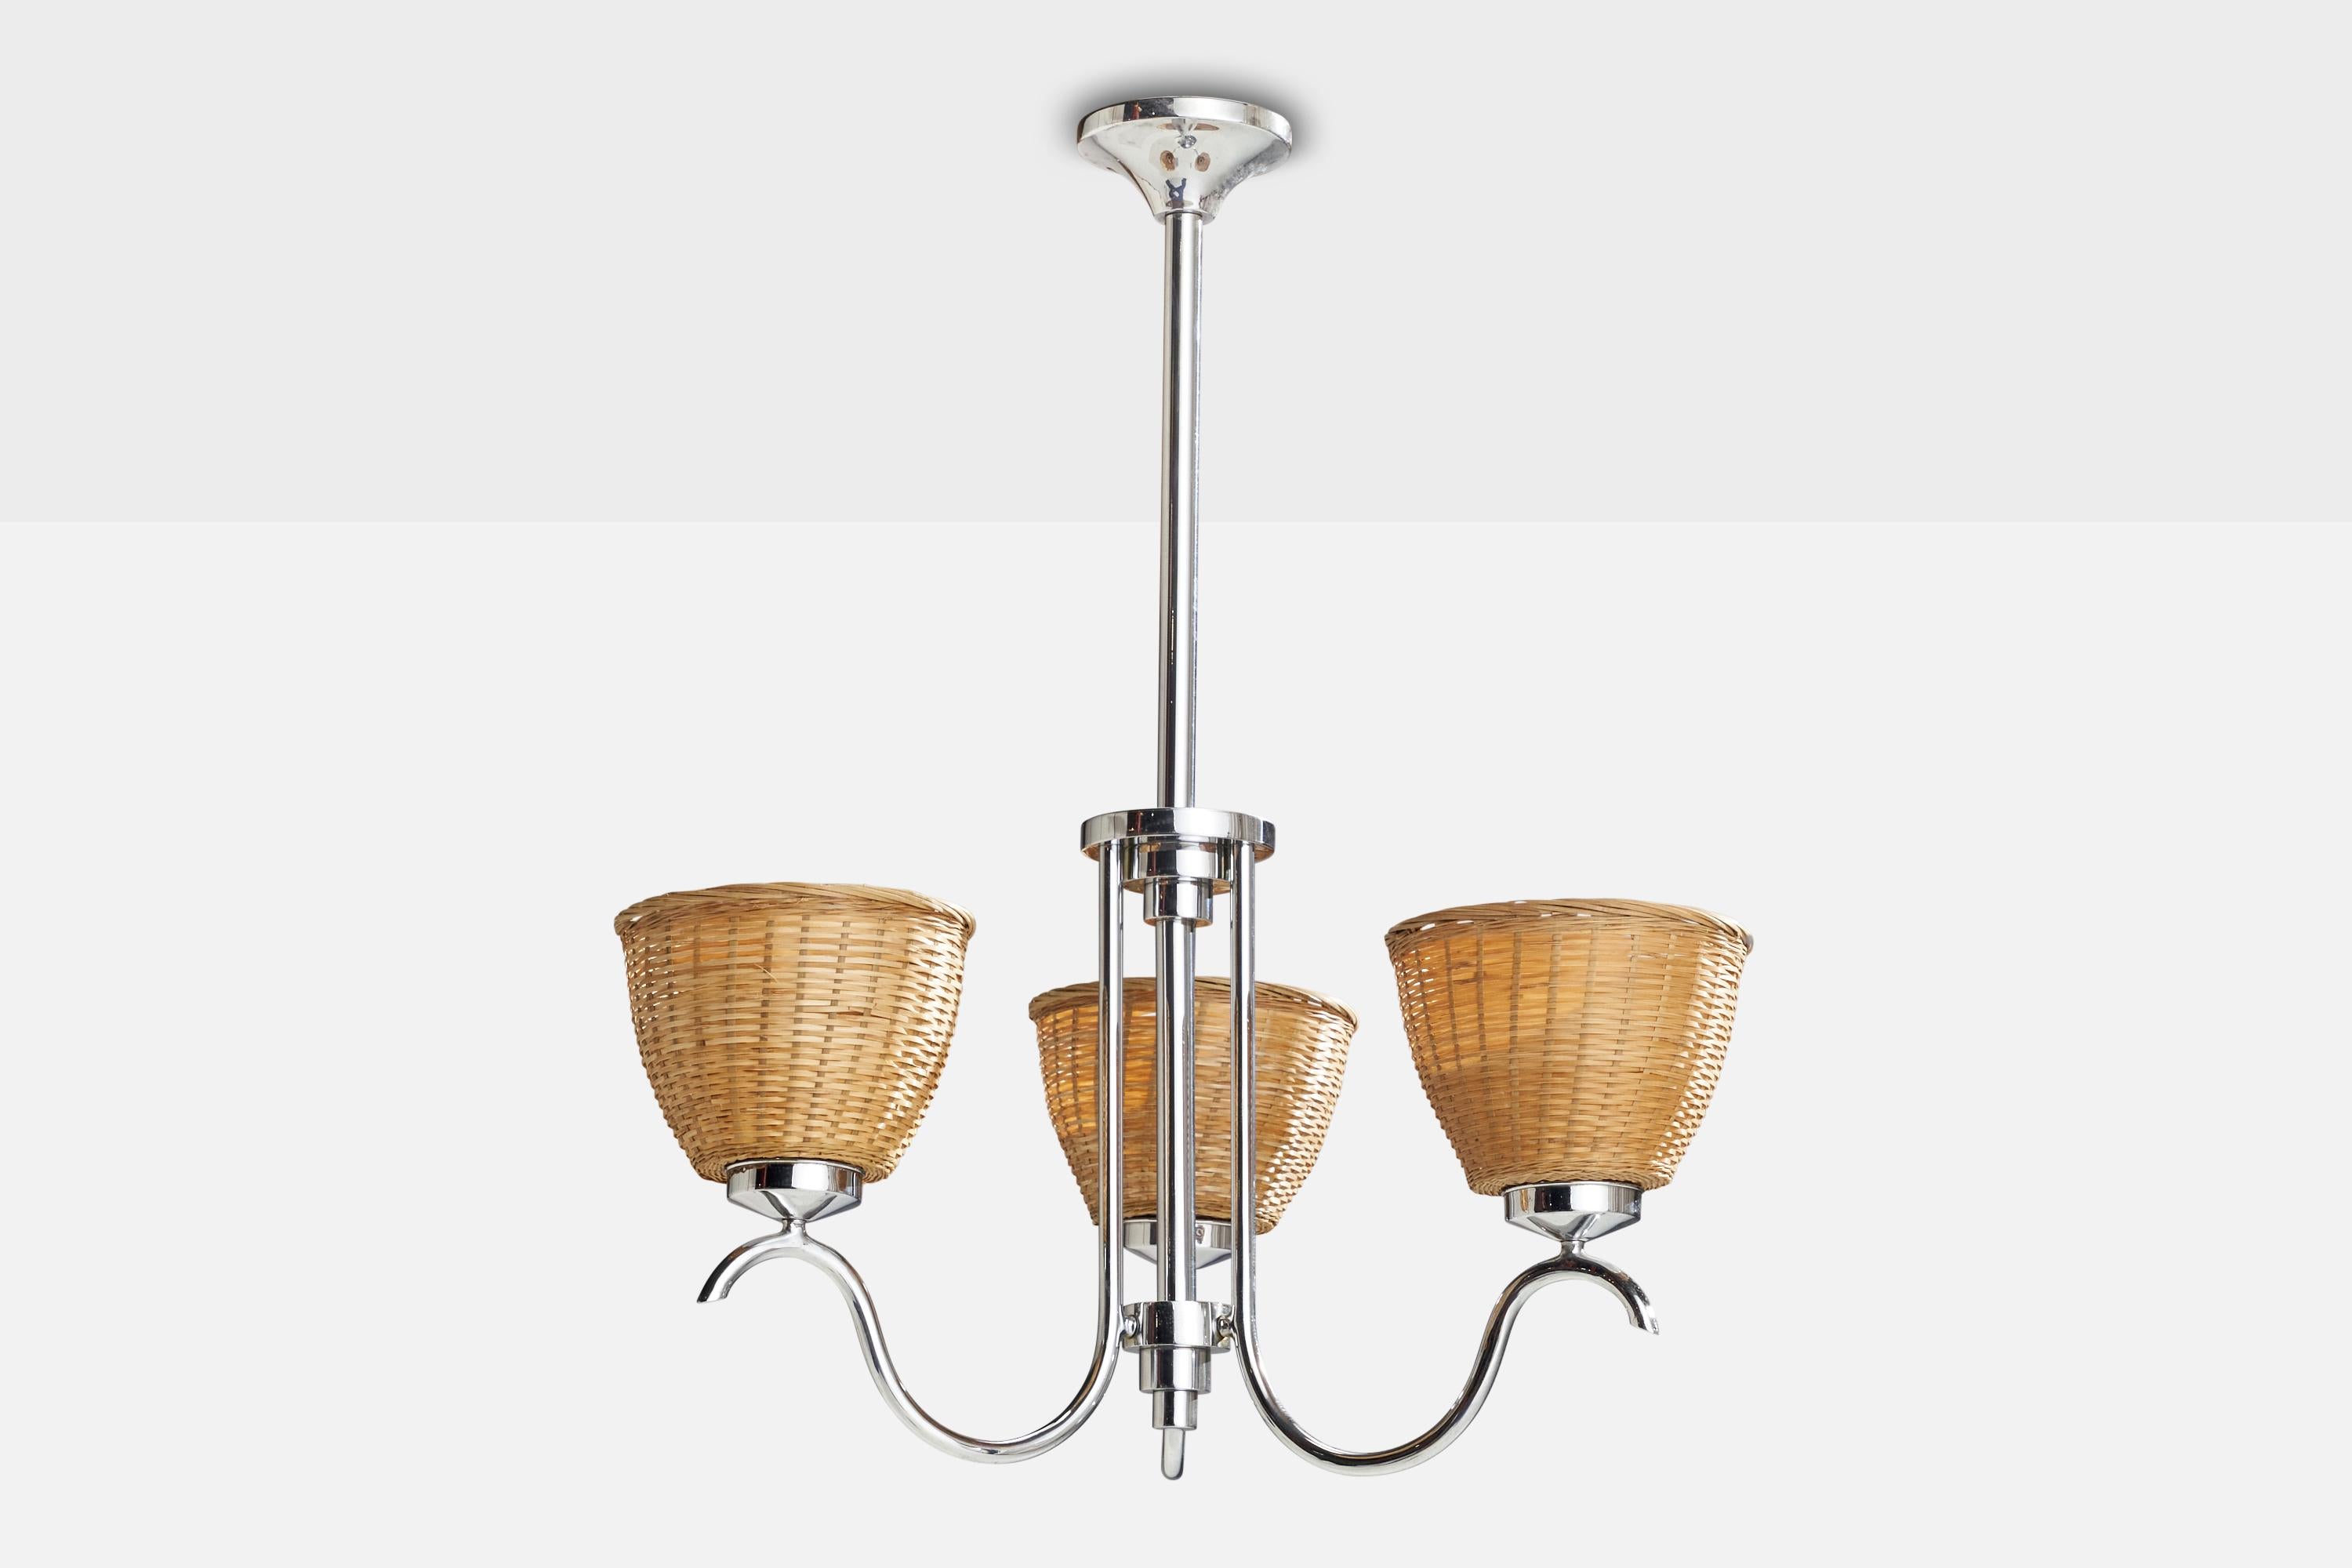 A chrome-plated metal and rattan chandelier designed and produced in Sweden, 1930s.

Dimensions of canopy (inches): 2” H x 4” Diameter
Socket takes standard E-26 bulbs. 3 sockets.There is no maximum wattage stated on the fixture. All lighting will